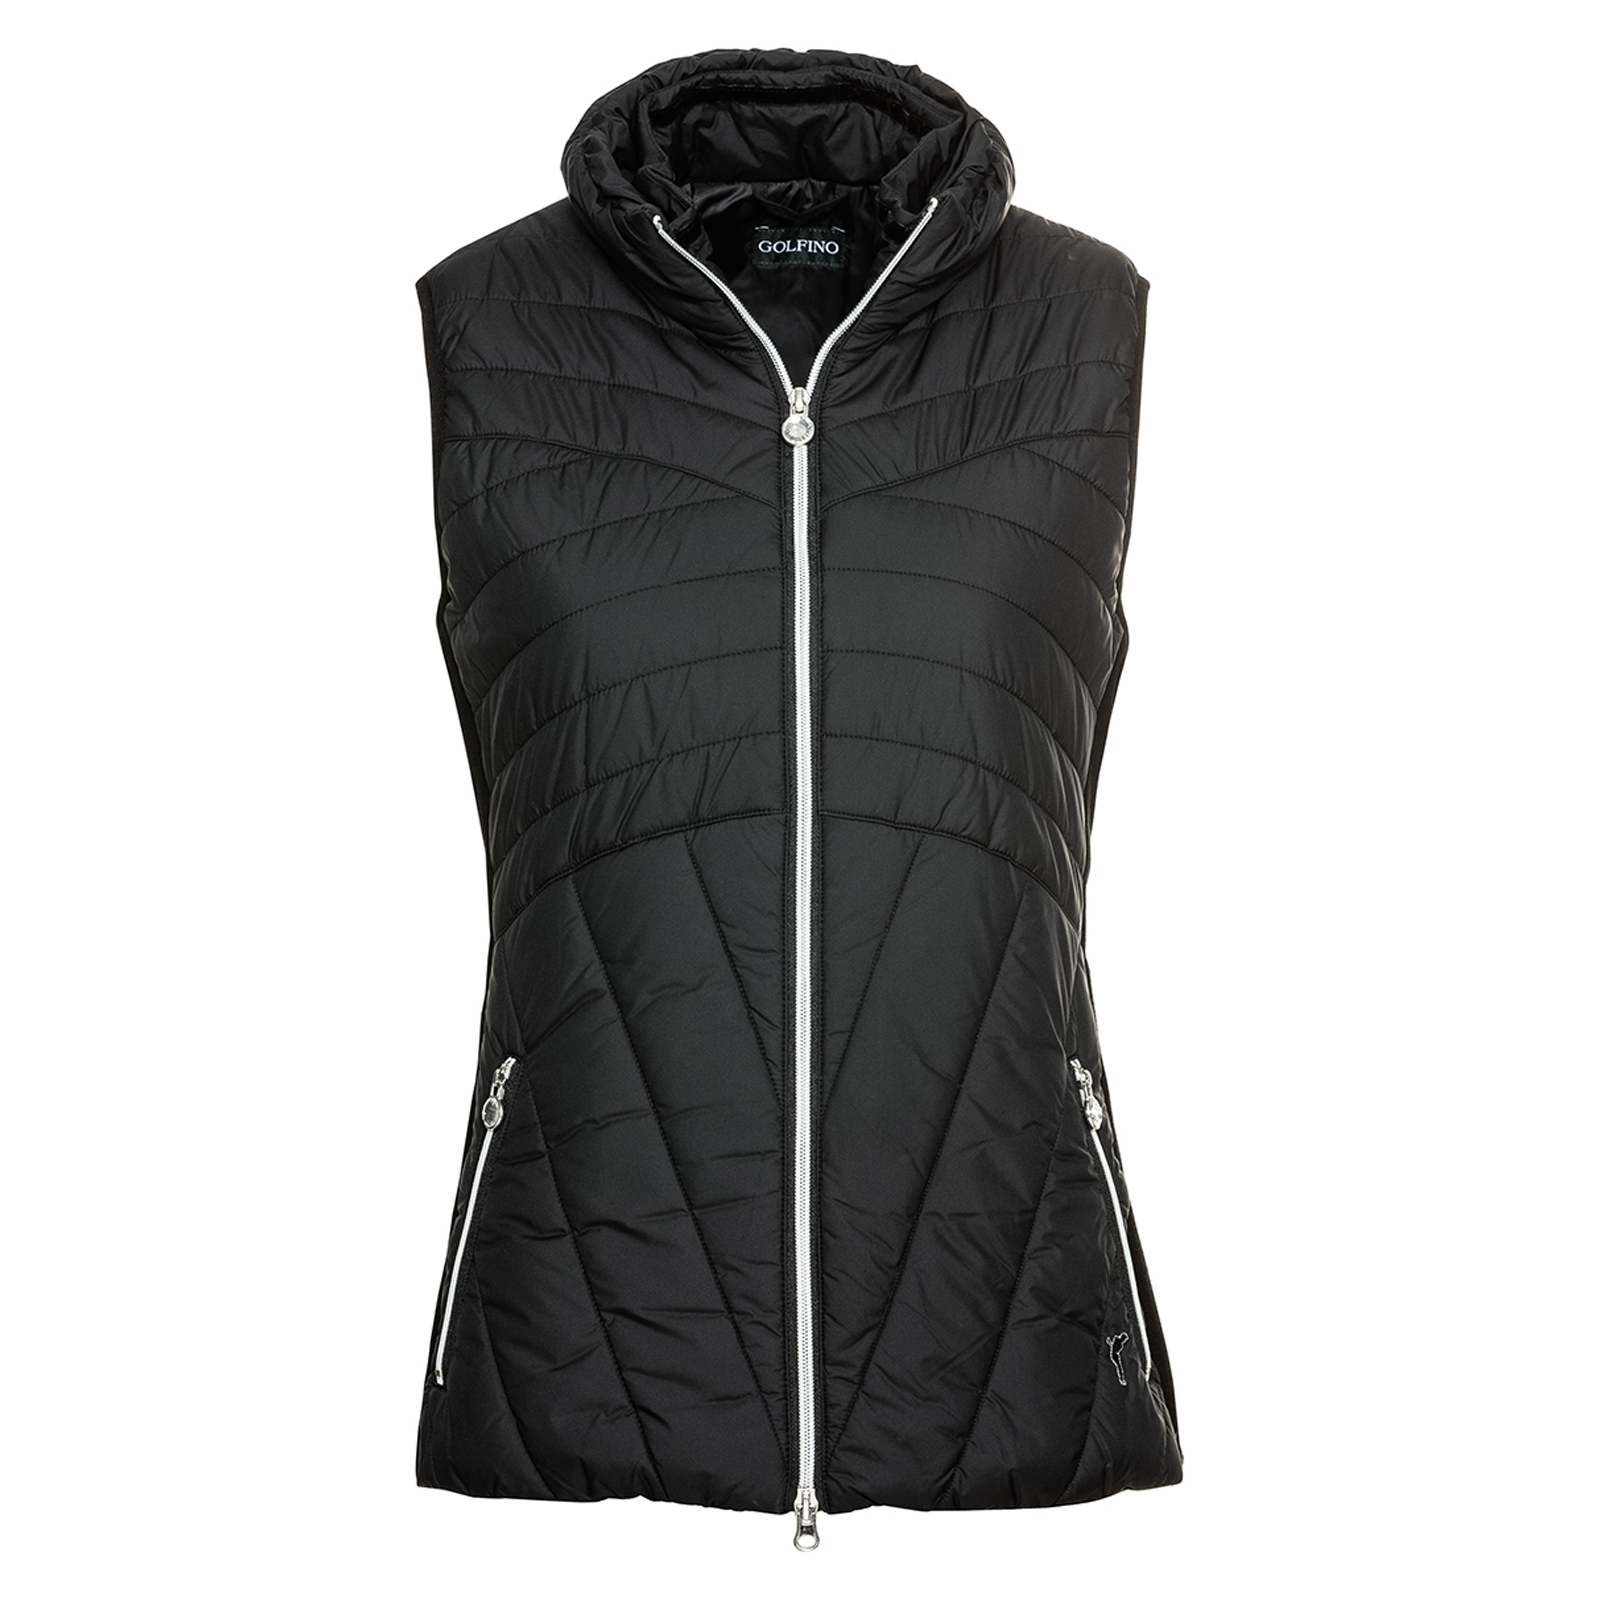 Comfortable and sporty ladies' waistcoat 